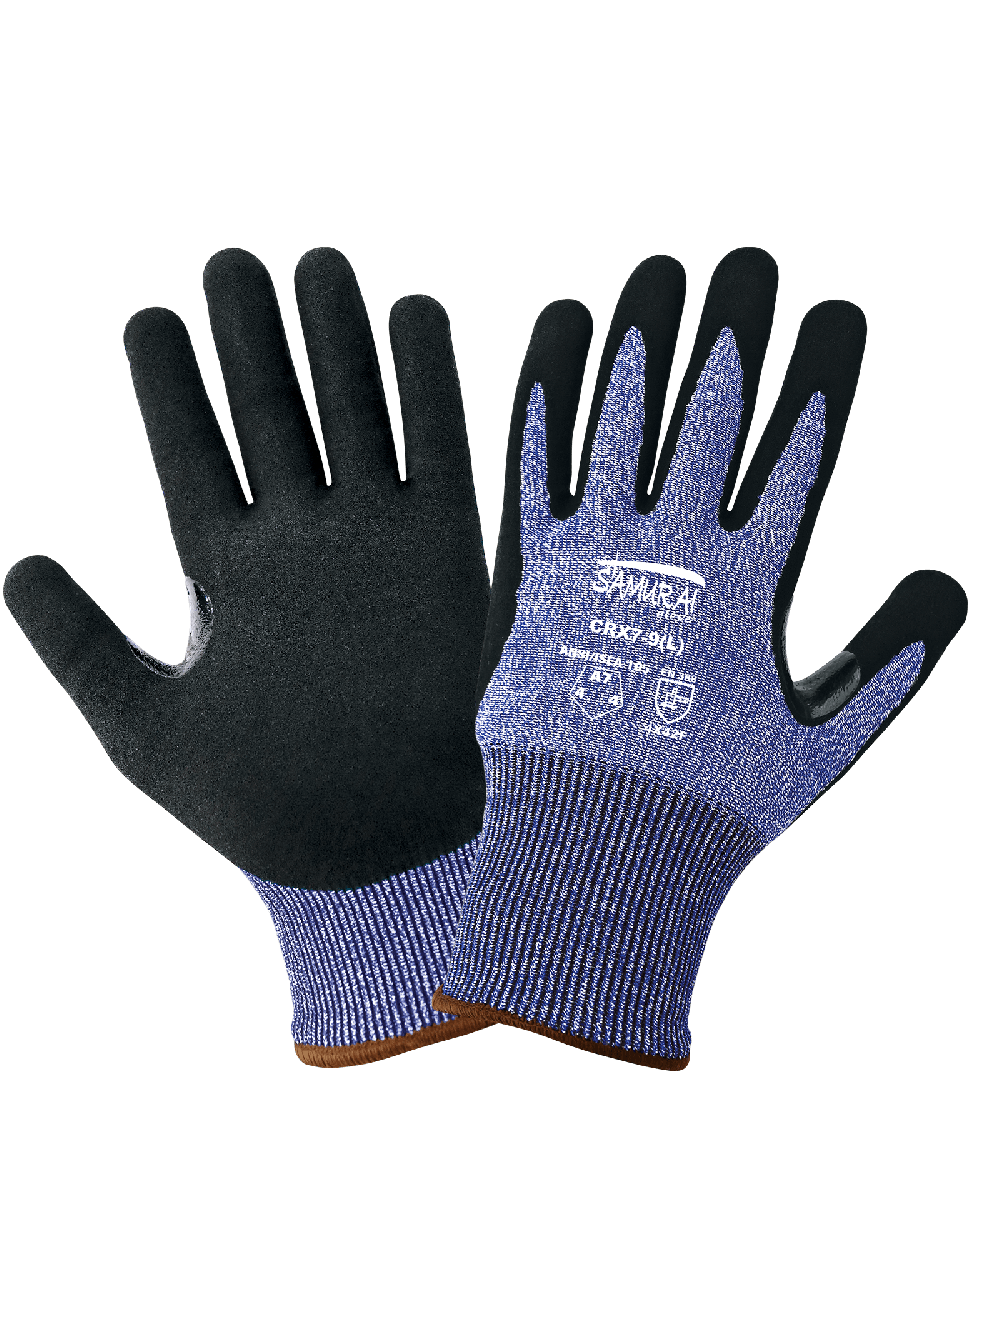 Samurai Glove® Cut, Abrasion, and Puncture Resistant Xtreme Foam Technology Coated Gloves Made with Tuffalene® - LIMITED STOCK - CRX7